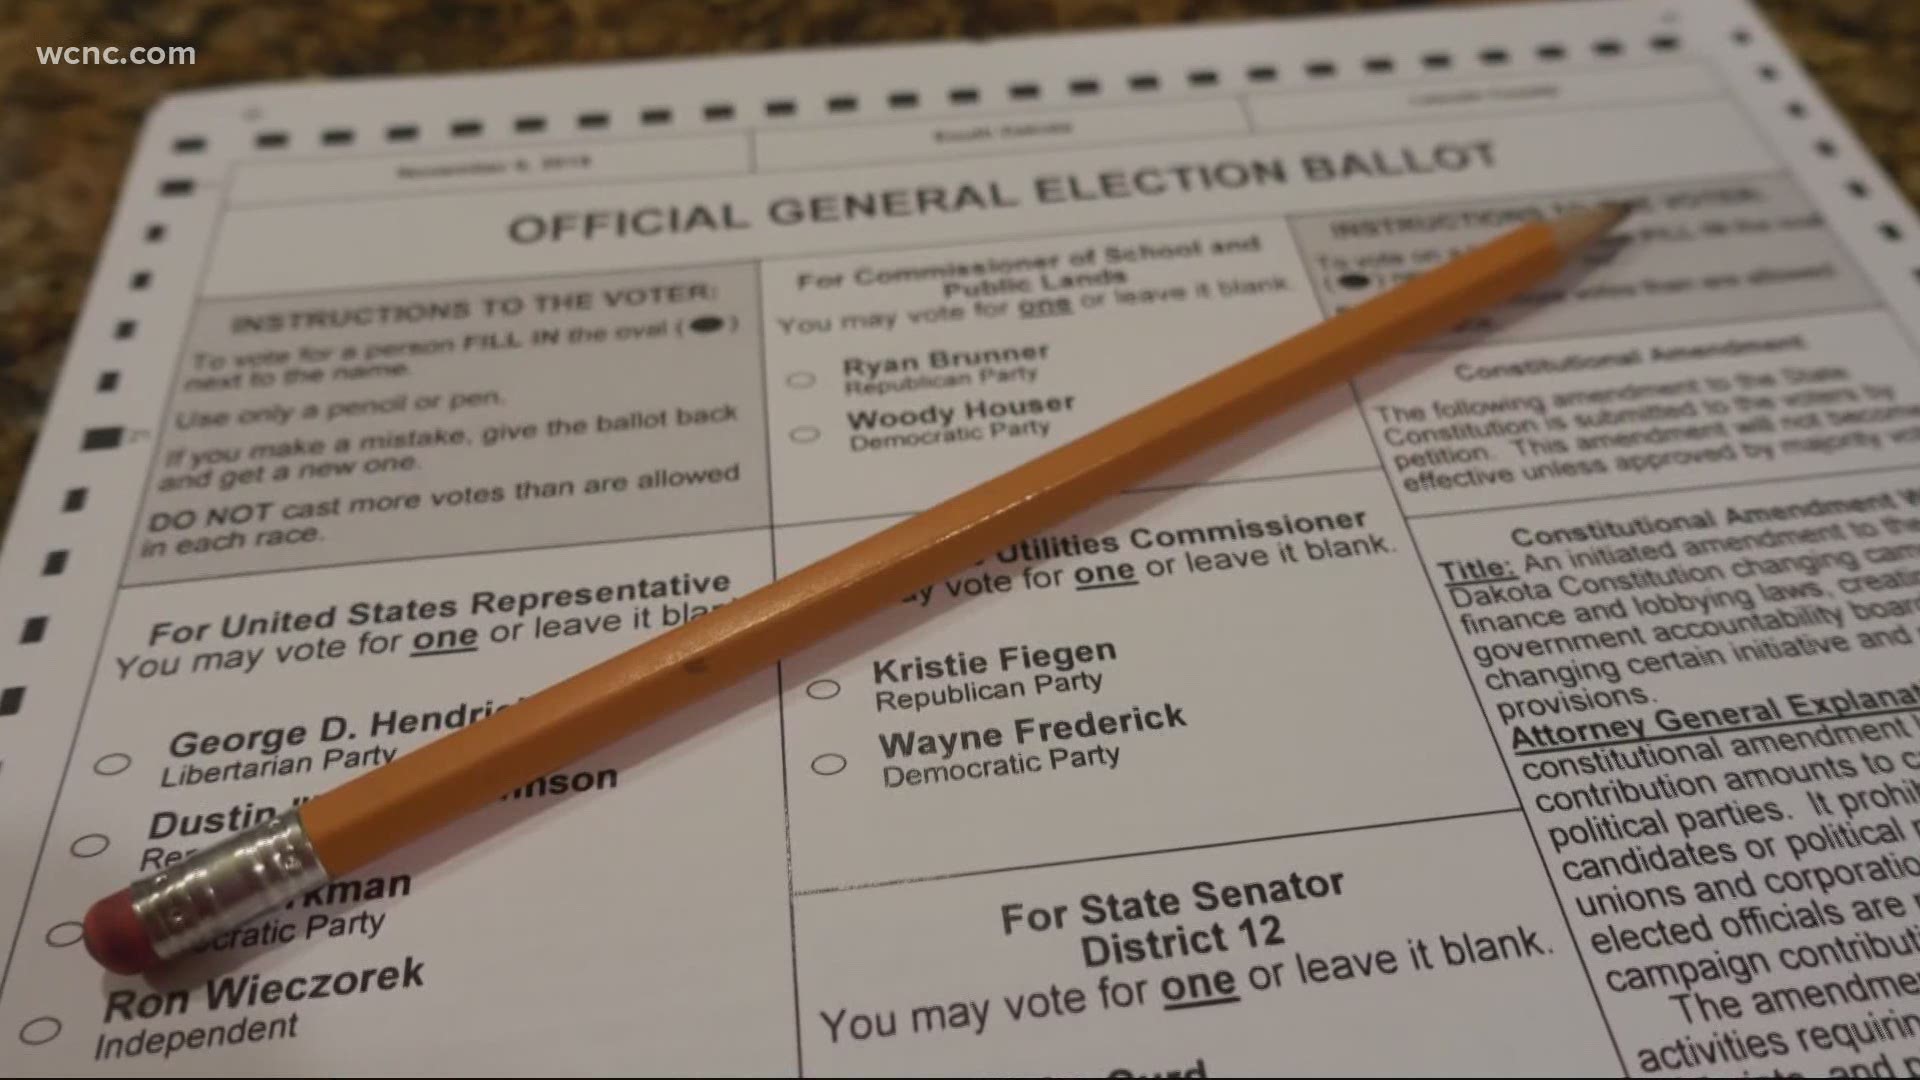 "The original intent of these signature requirements is to prevent voter fraud”, Eric S. Heber UNCC Professor.